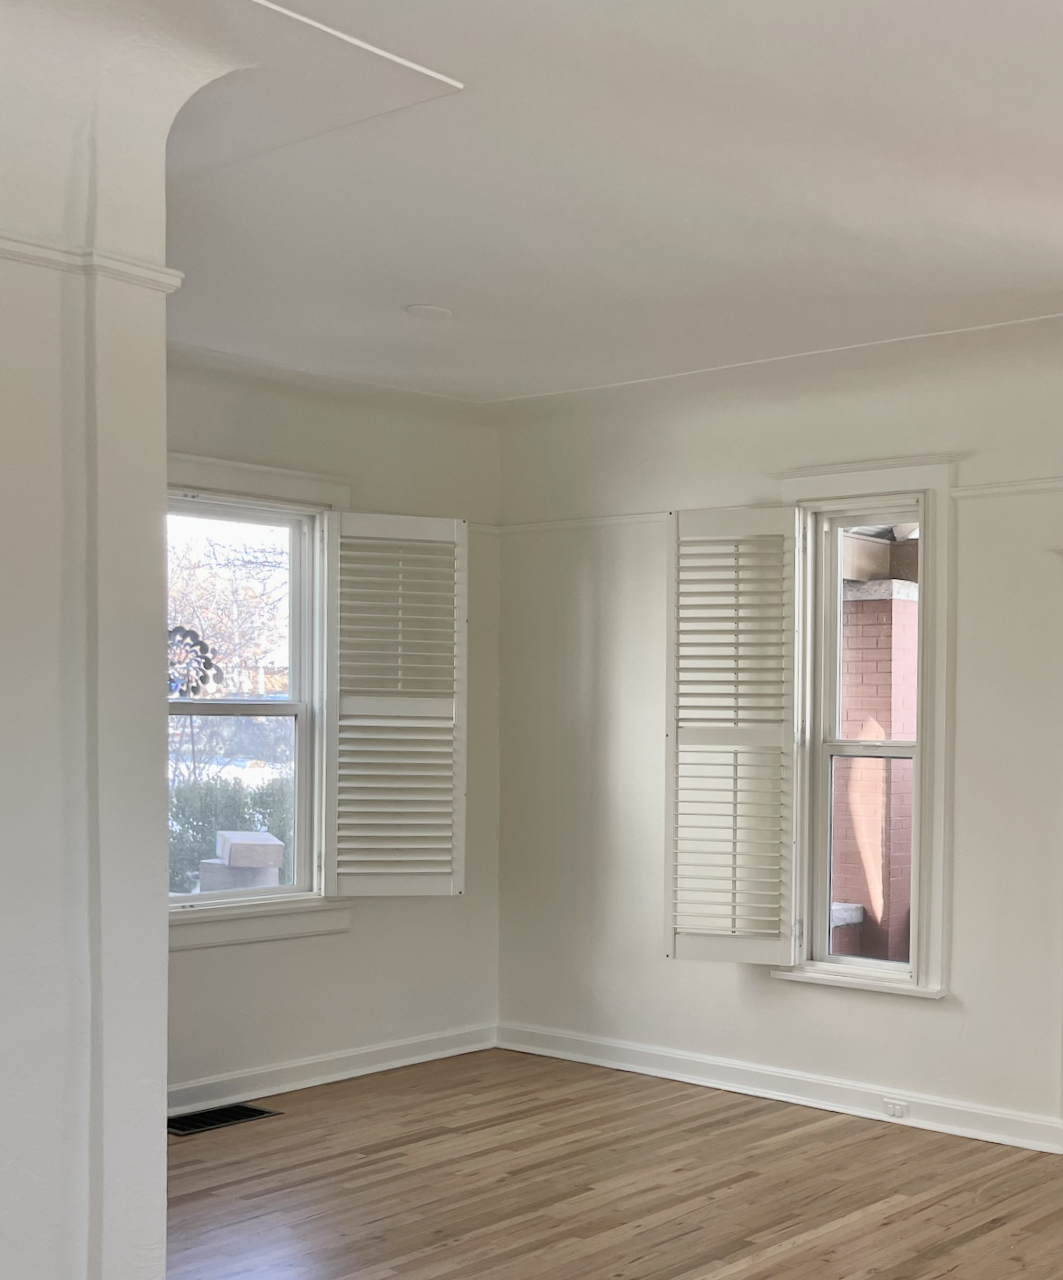 Room with Snowfall White walls, trim, ceiling and shutters